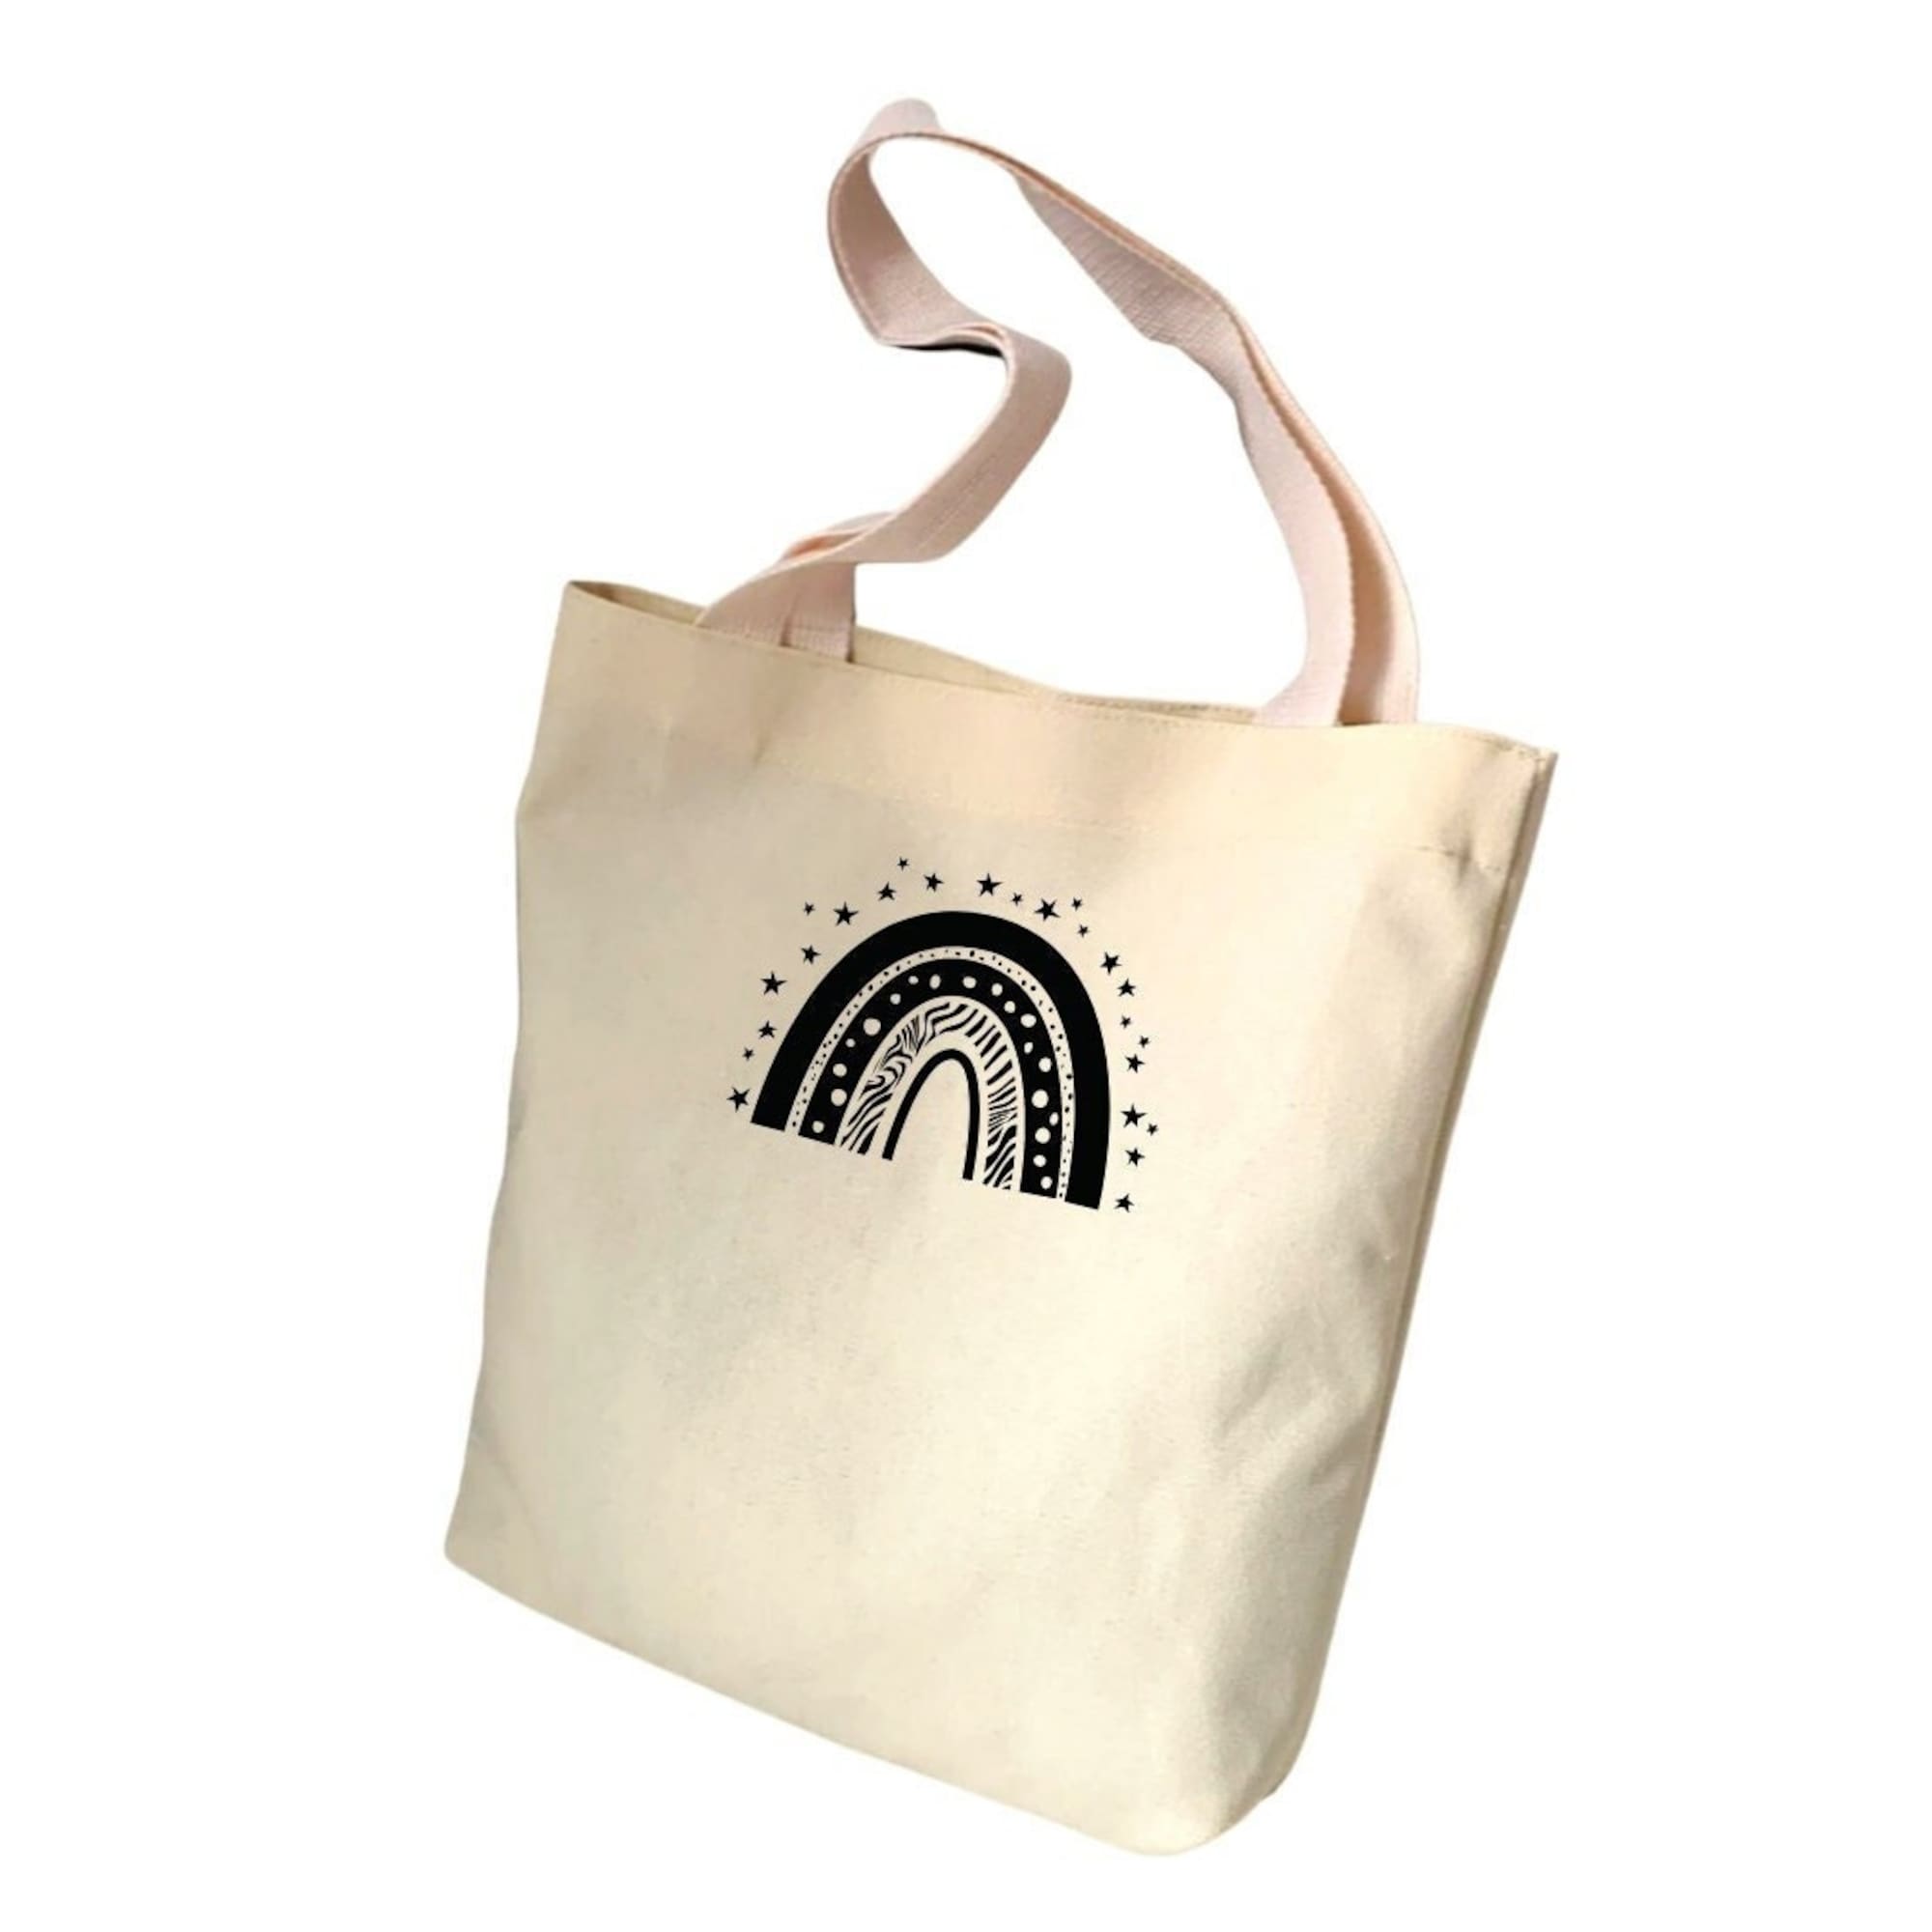 Discover Rainbow Tote Bag | Back To School Tote Bag